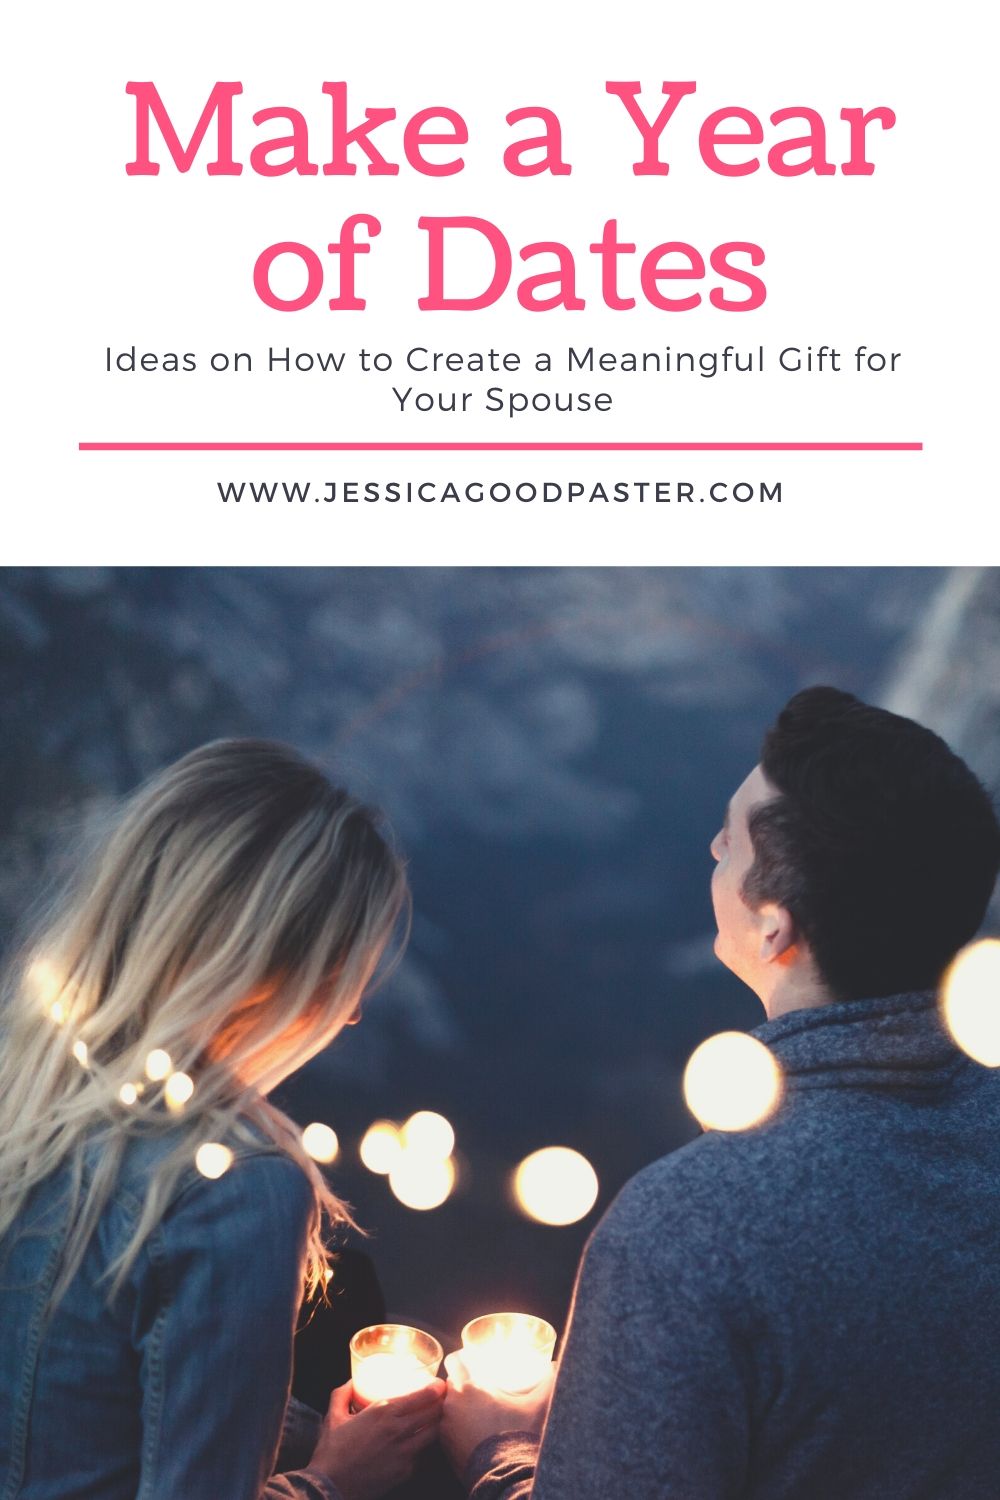 Make A Year of Dates the Best Gift Ever | Time together is the best way to celebrate your husband, wife, boyfriend, or girlfriend! A year of preplanned dates is the gift that keeps on giving. Includes 12 fun date night ideas for any budget. #datenight #dateideas #valentinesday #giftideas #yearofdates #anniversary